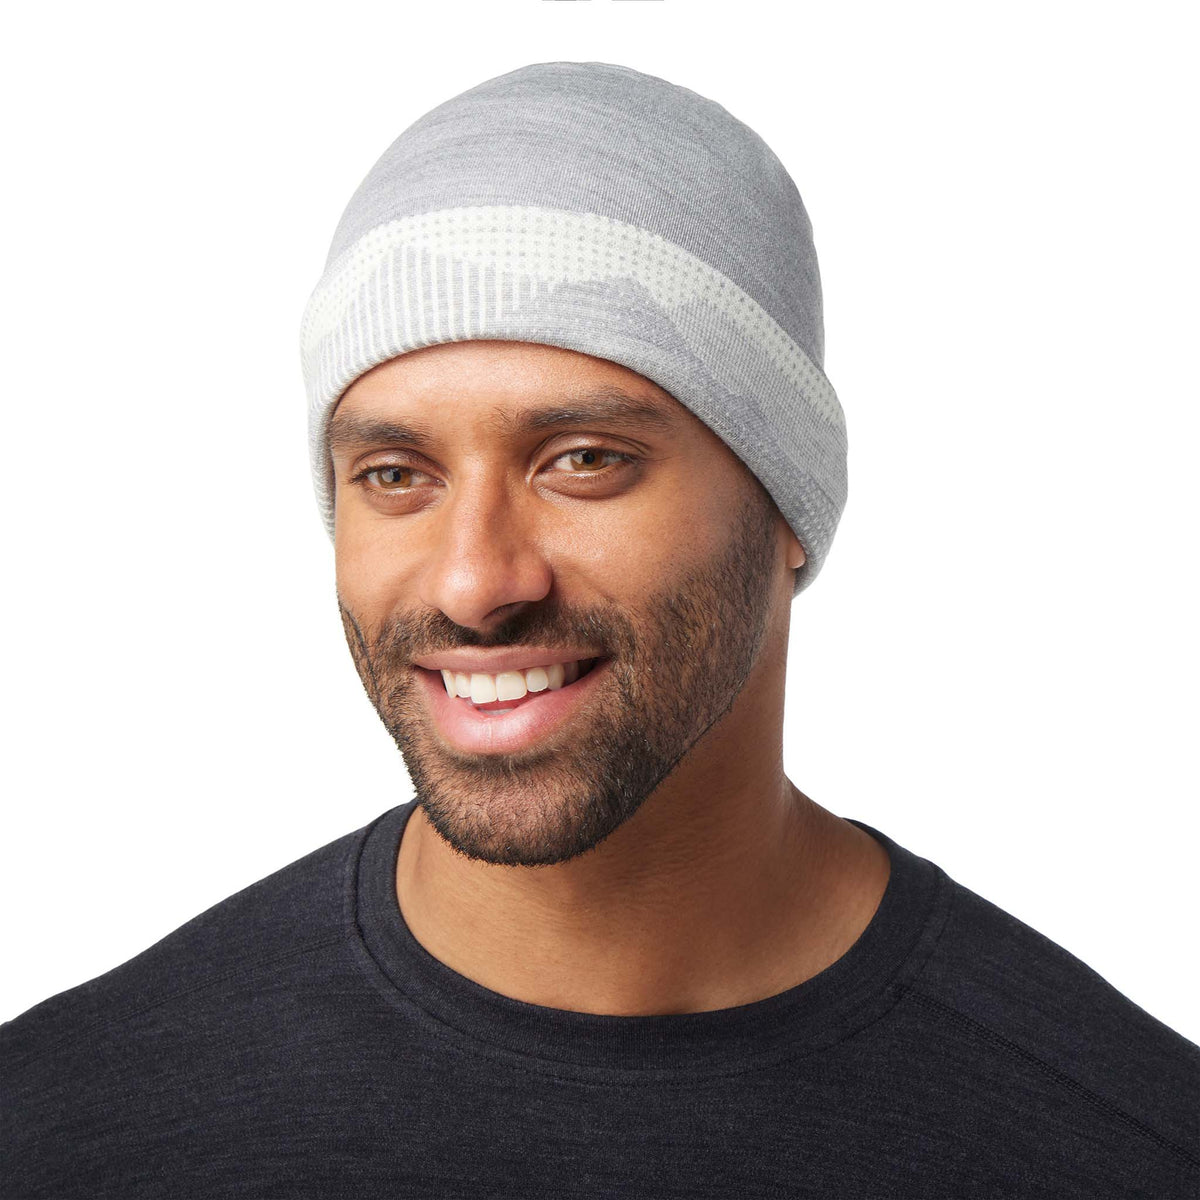 Tuque a revers black mountain Smartwool Merino 250 homme lightgray mountain scape